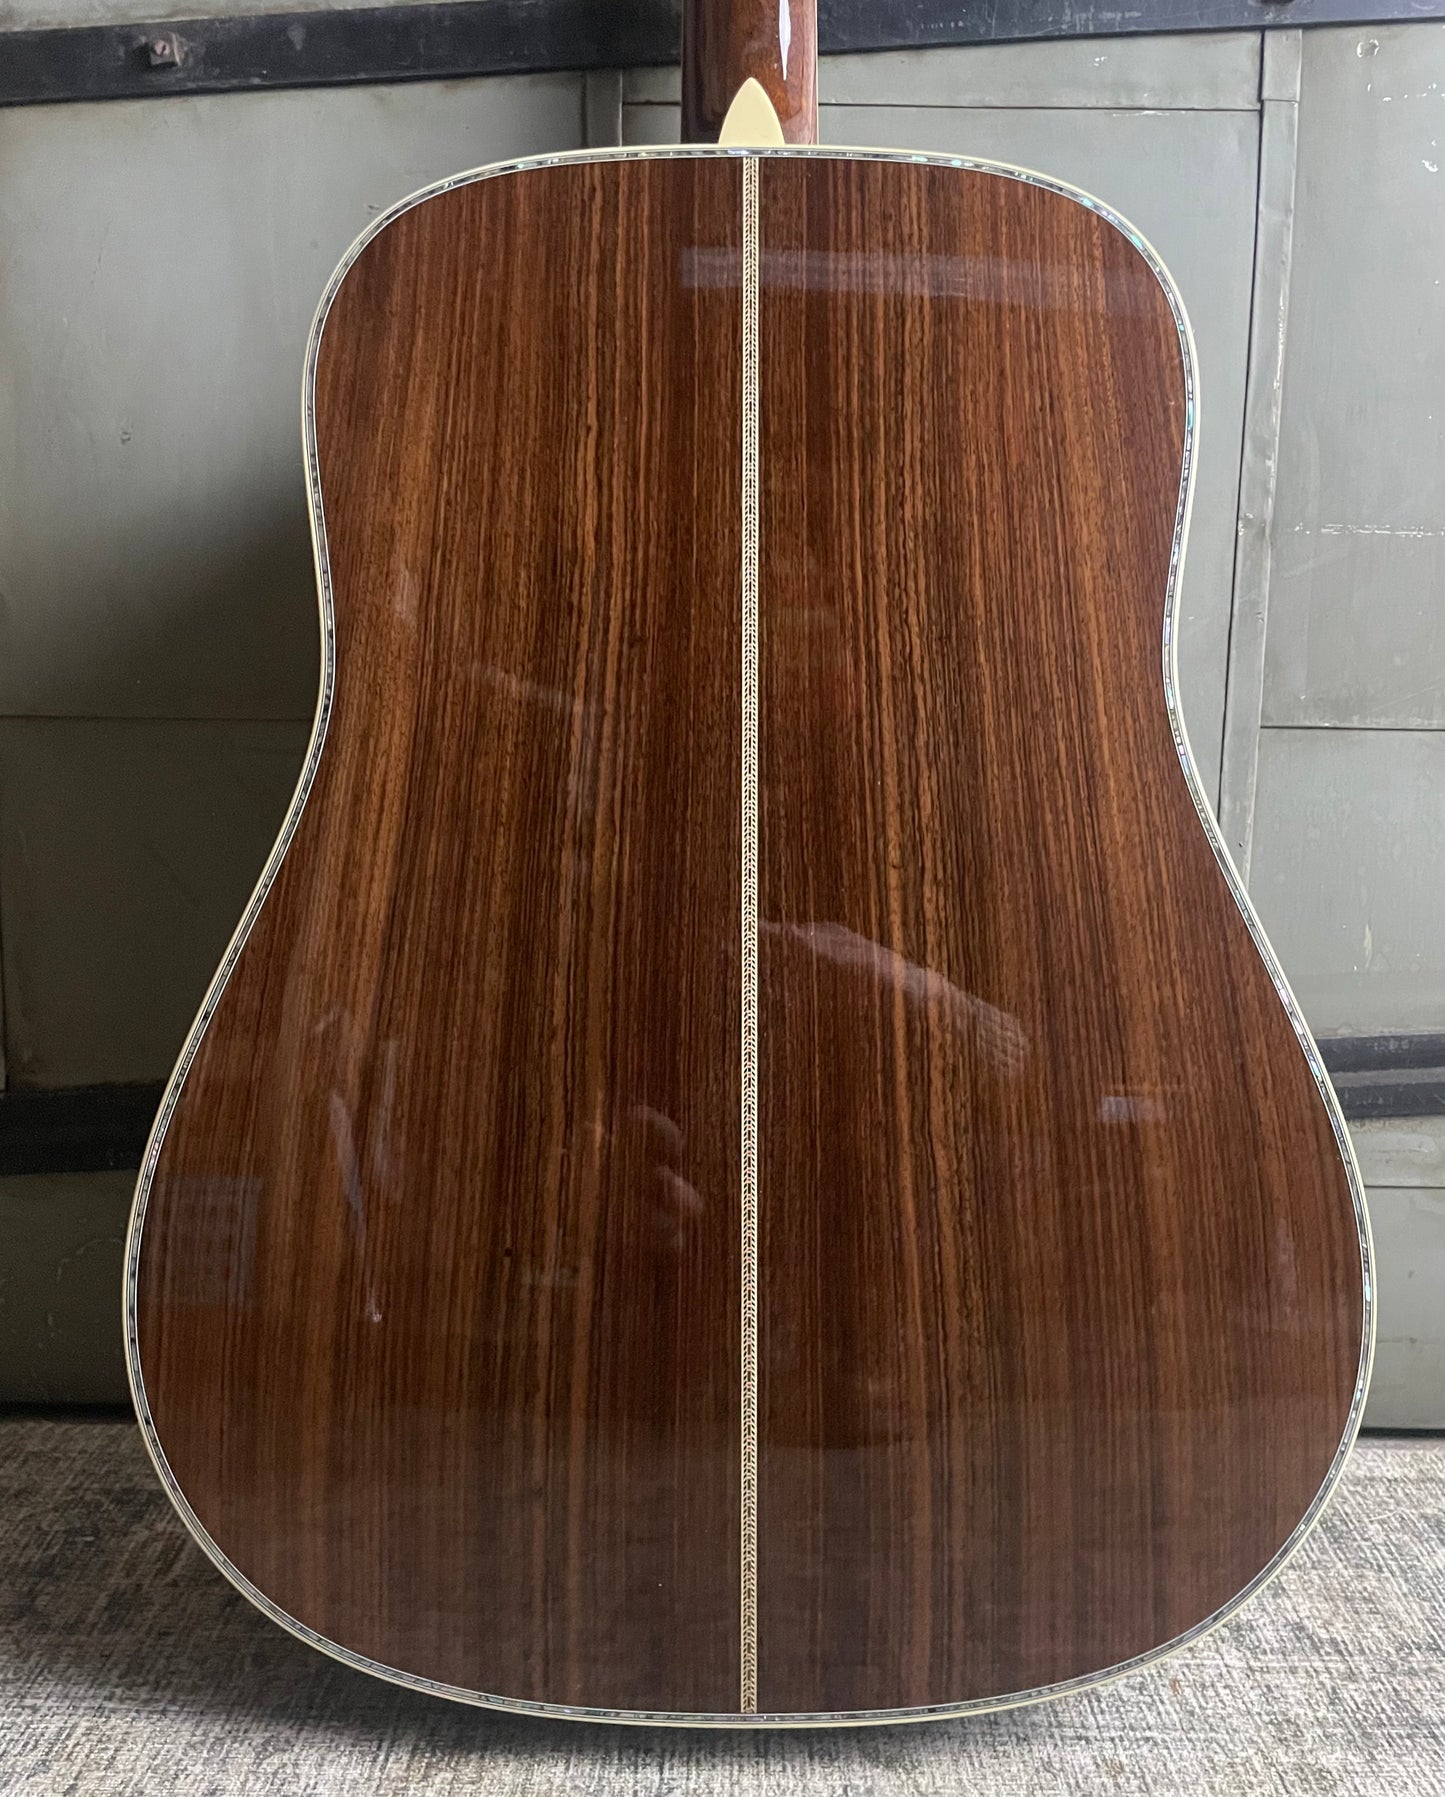 2020 Martin D-45 (USED)